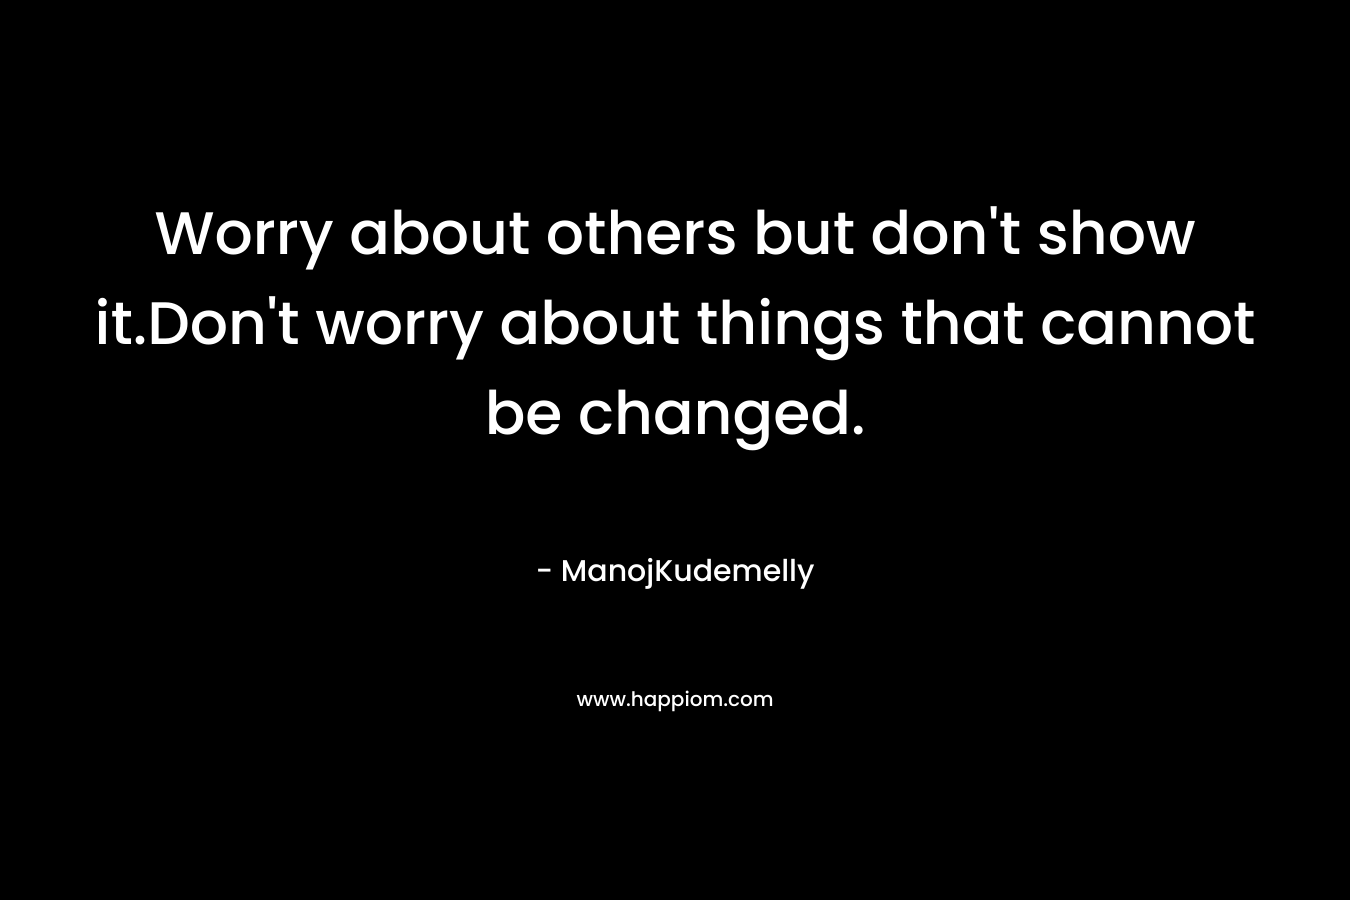 Worry about others but don't show it.Don't worry about things that cannot be changed.